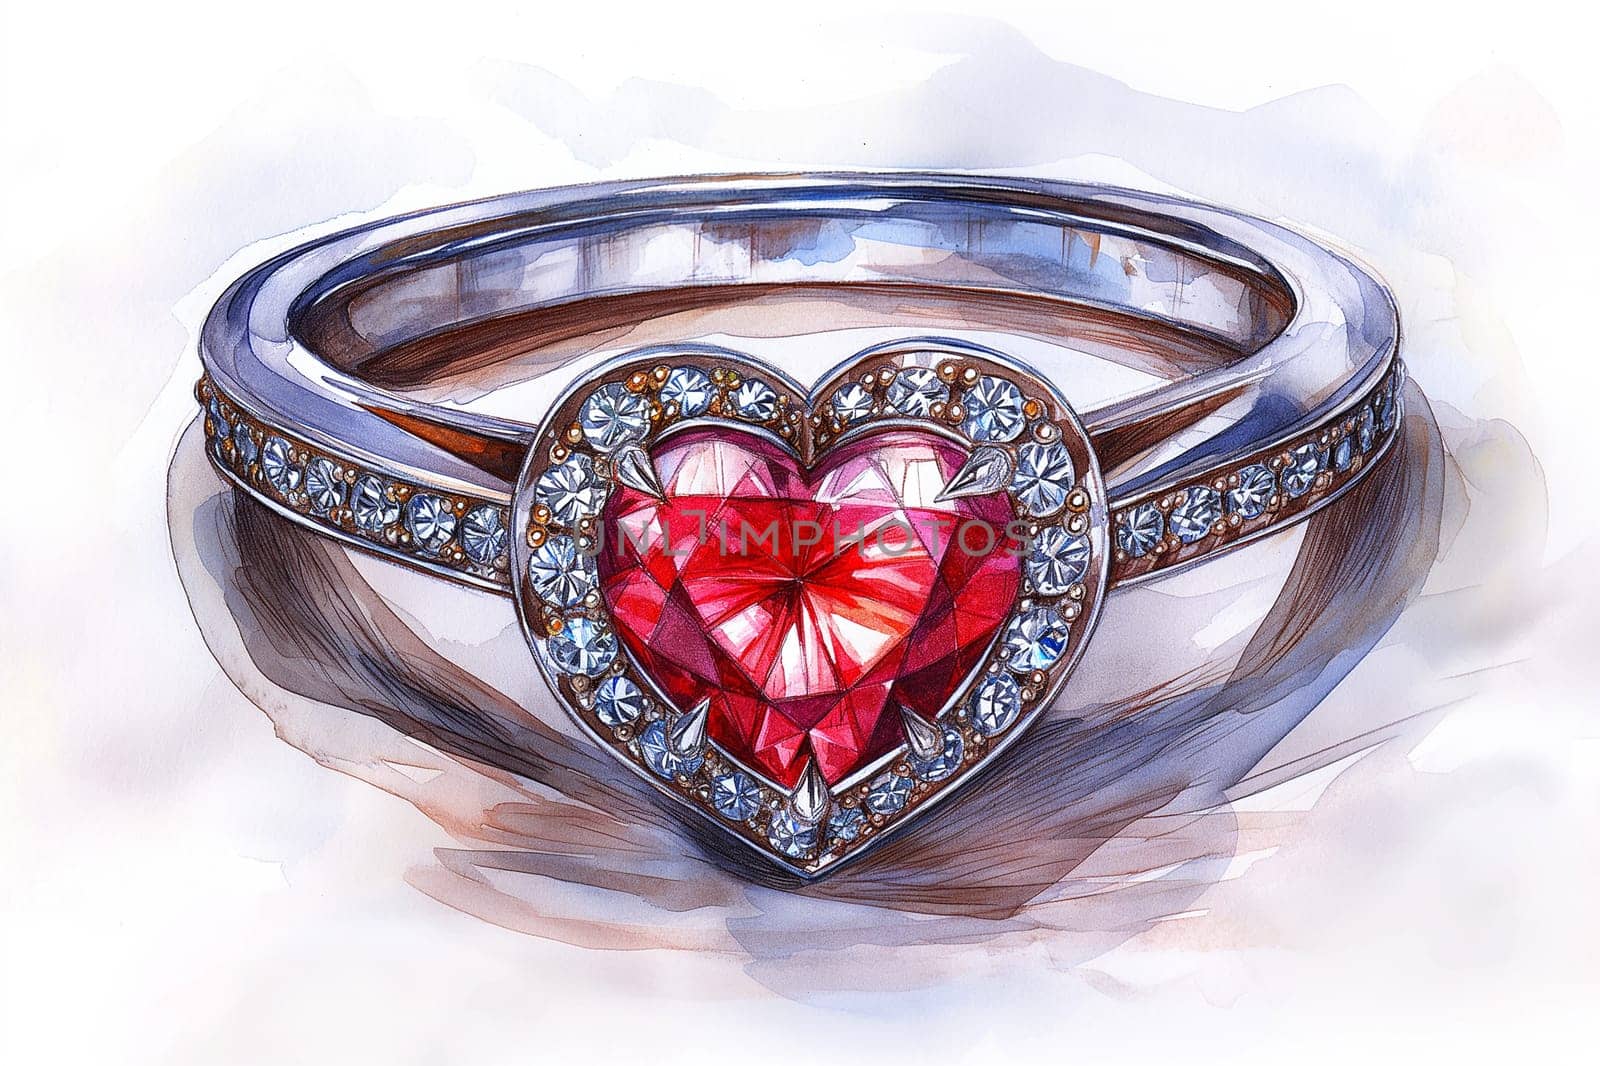 Illustration of a heart shaped red gemstone ring with surrounding diamonds. by Hype2art